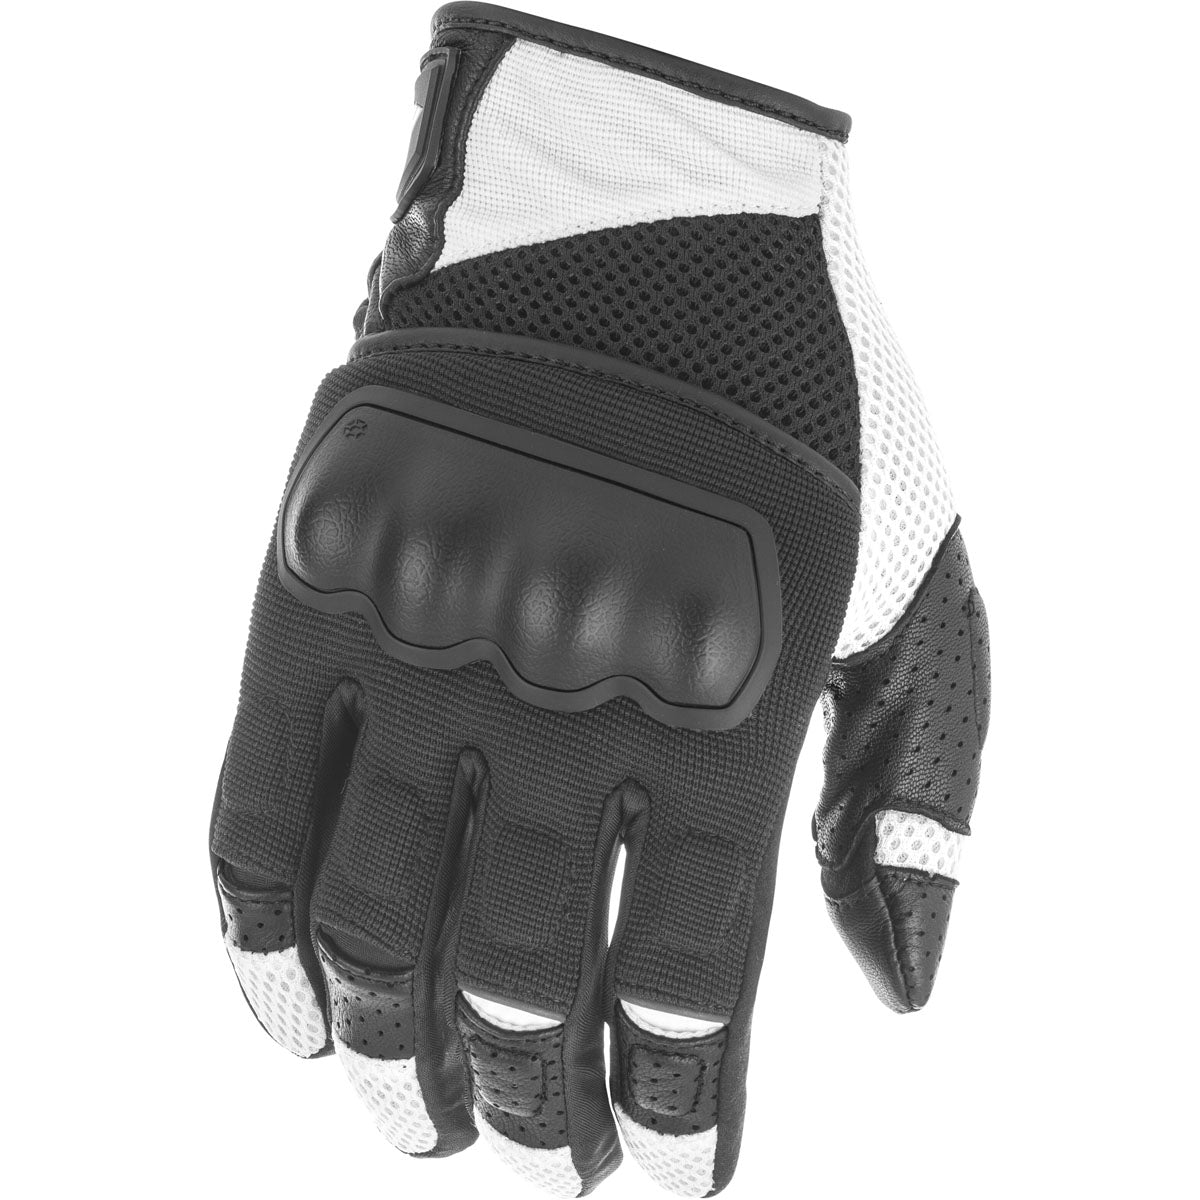 Fly Racing Coolpro Force Gloves - Closeout